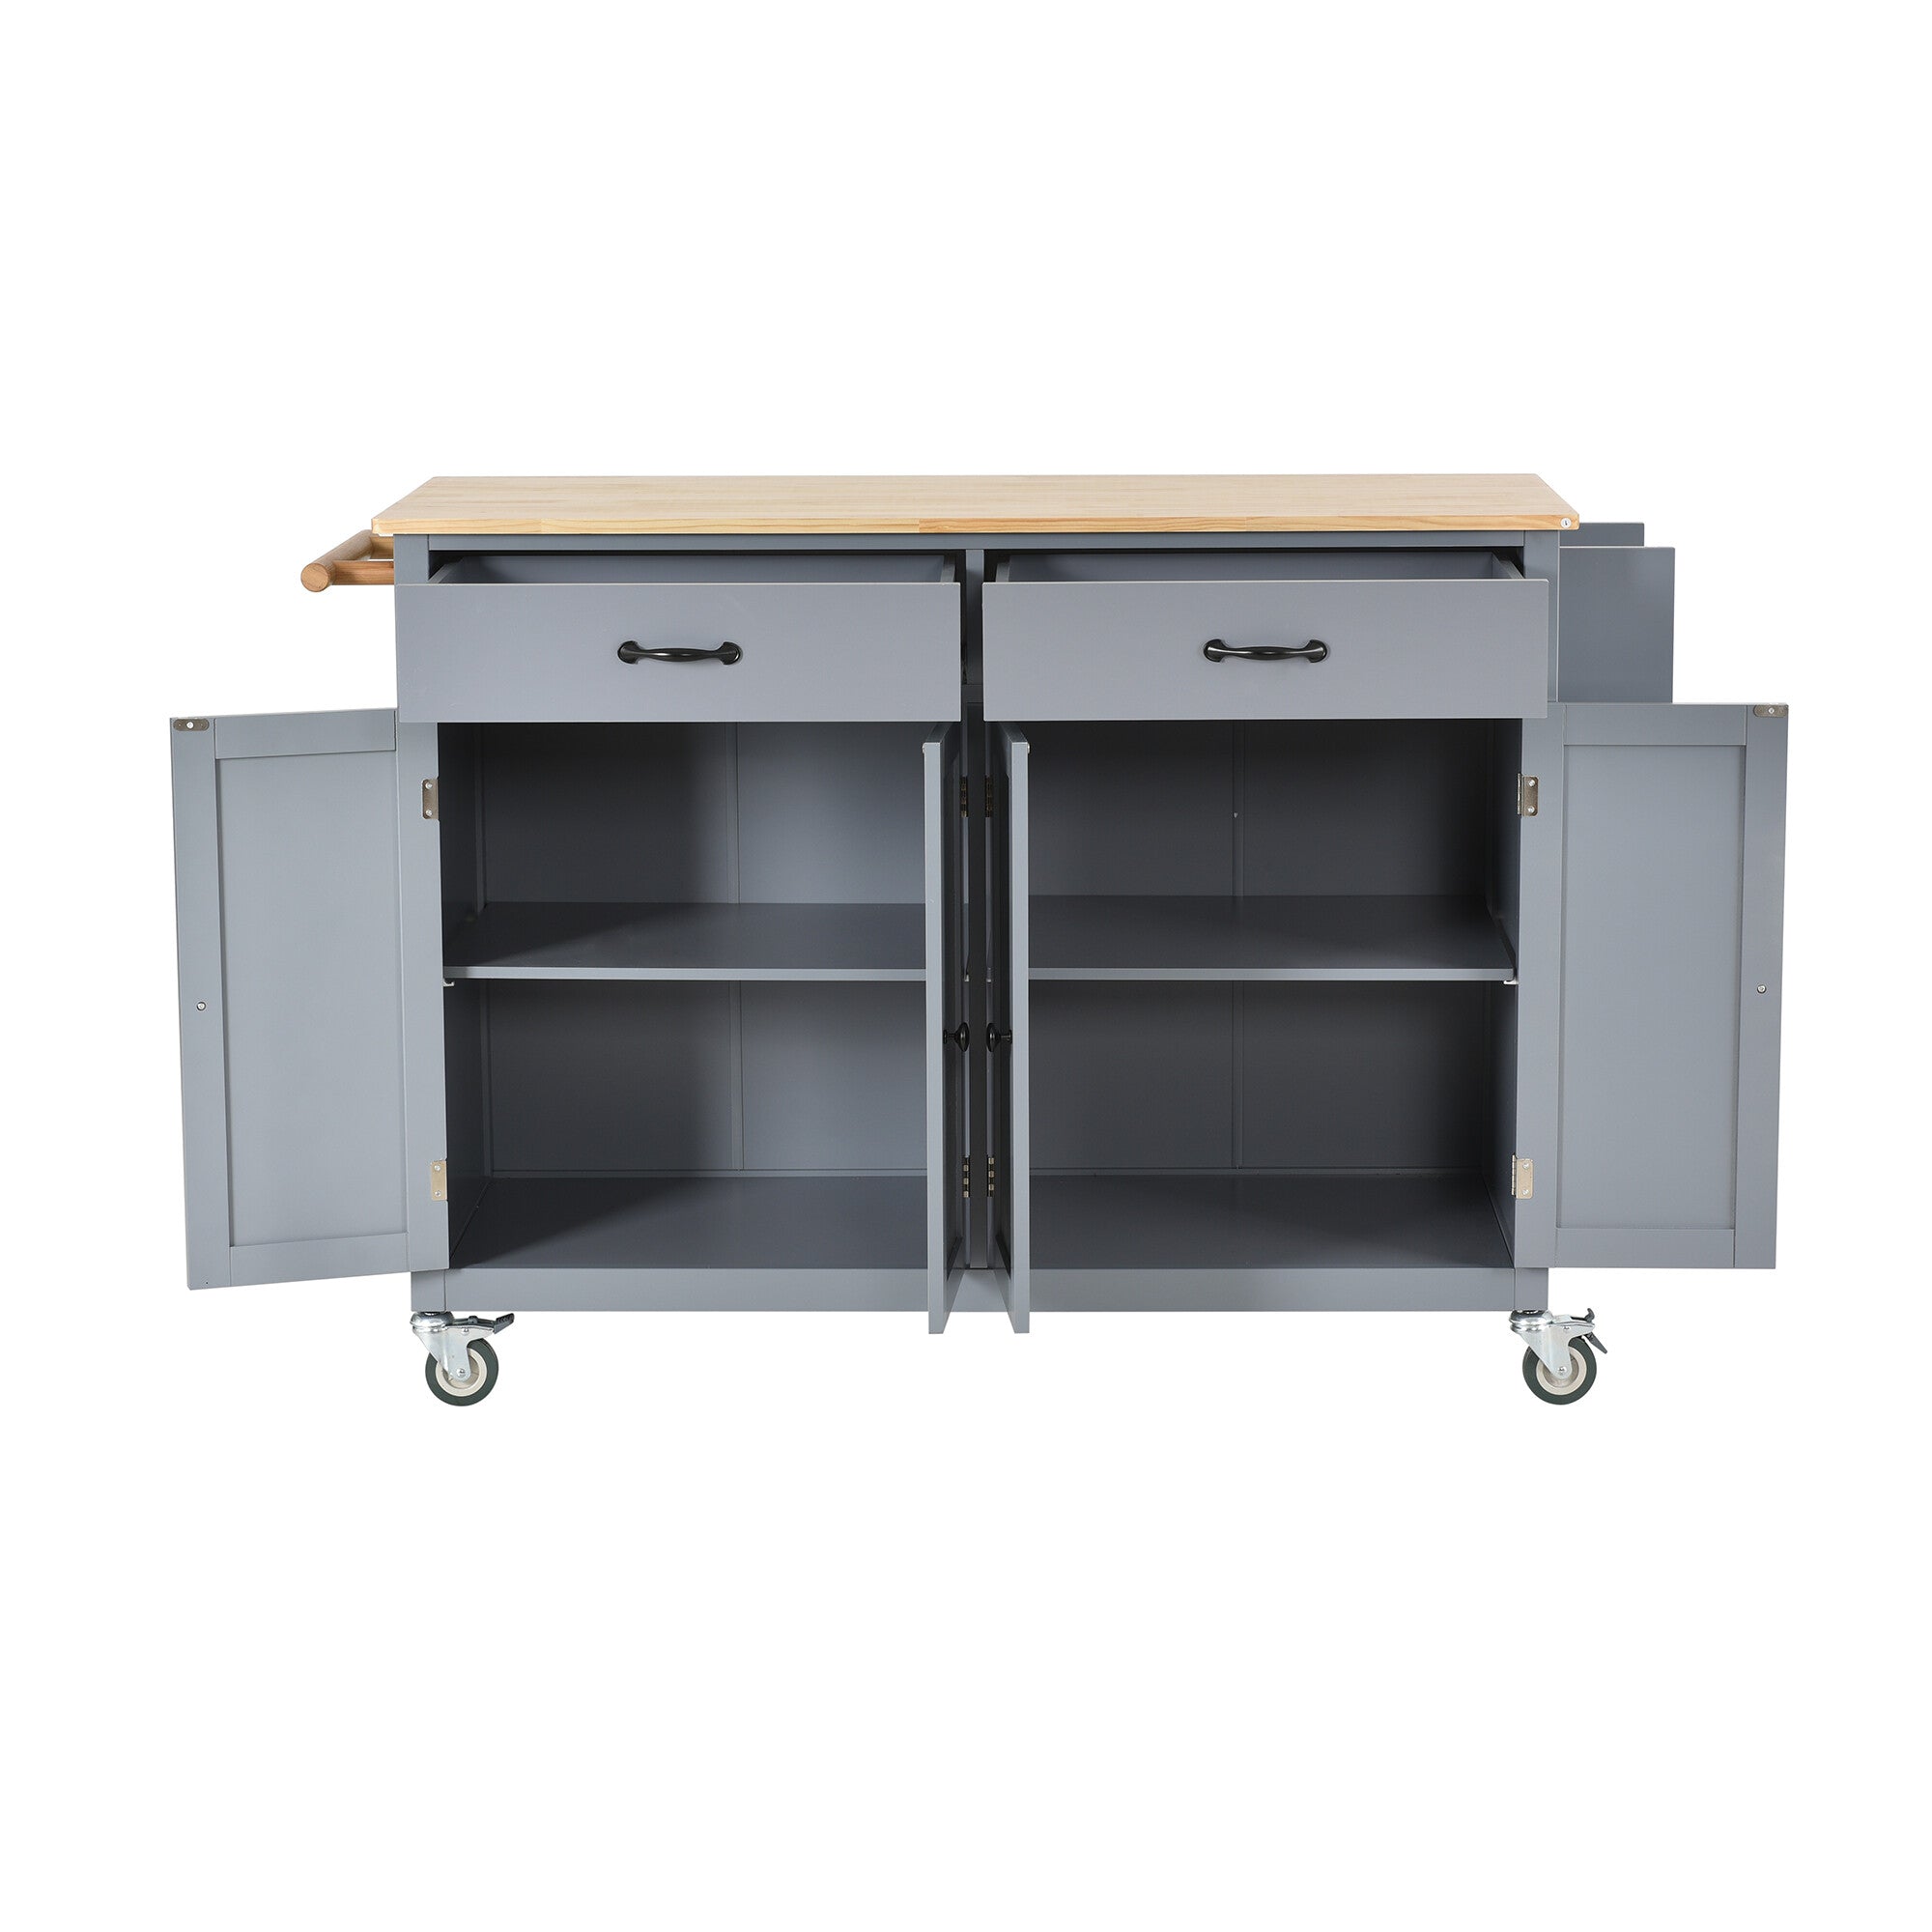 Kitchen Storage Cabinet Rolling Mobile Coffee Cart Station with 4 Door Cabinet and 2 Drawers， 54.3